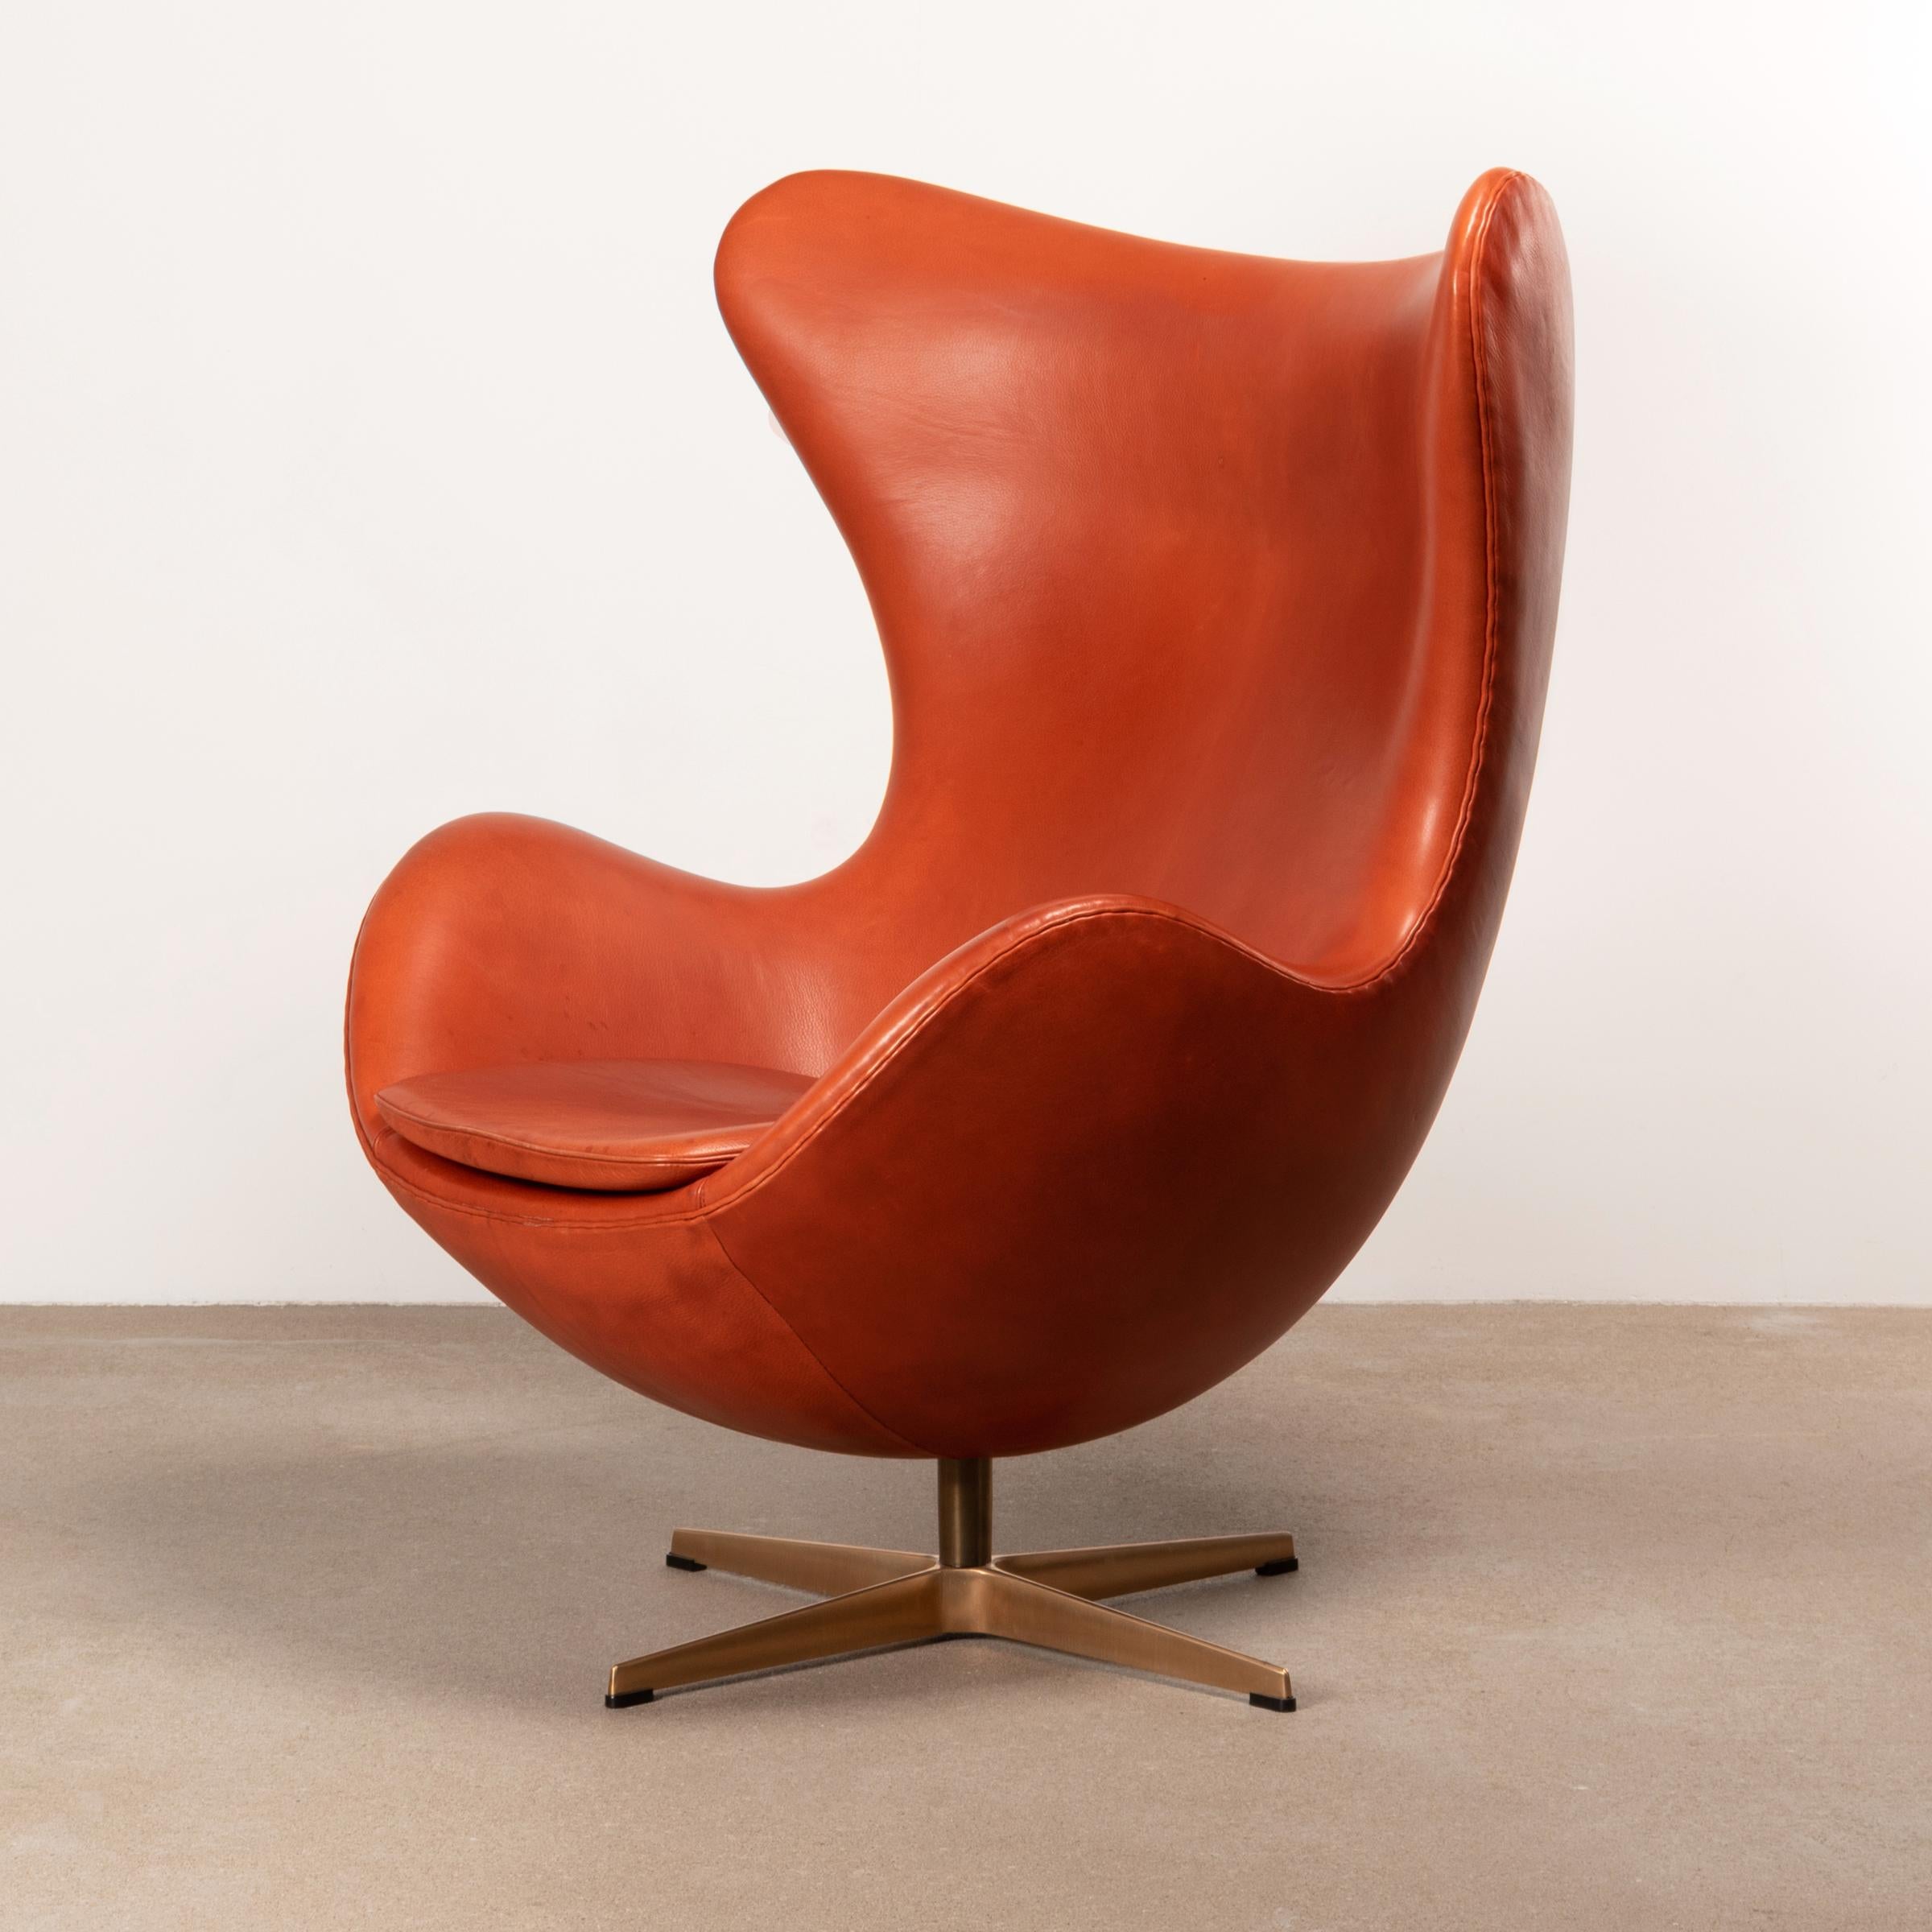 Iconic and beautifull Egg chair designed by Arne Jacobsen for Fitz Hansen in 1958. Light patined Grace Leather with base in brown bronze polisehed aluminum with swivel / adjustable tilt function. All in very good condition.